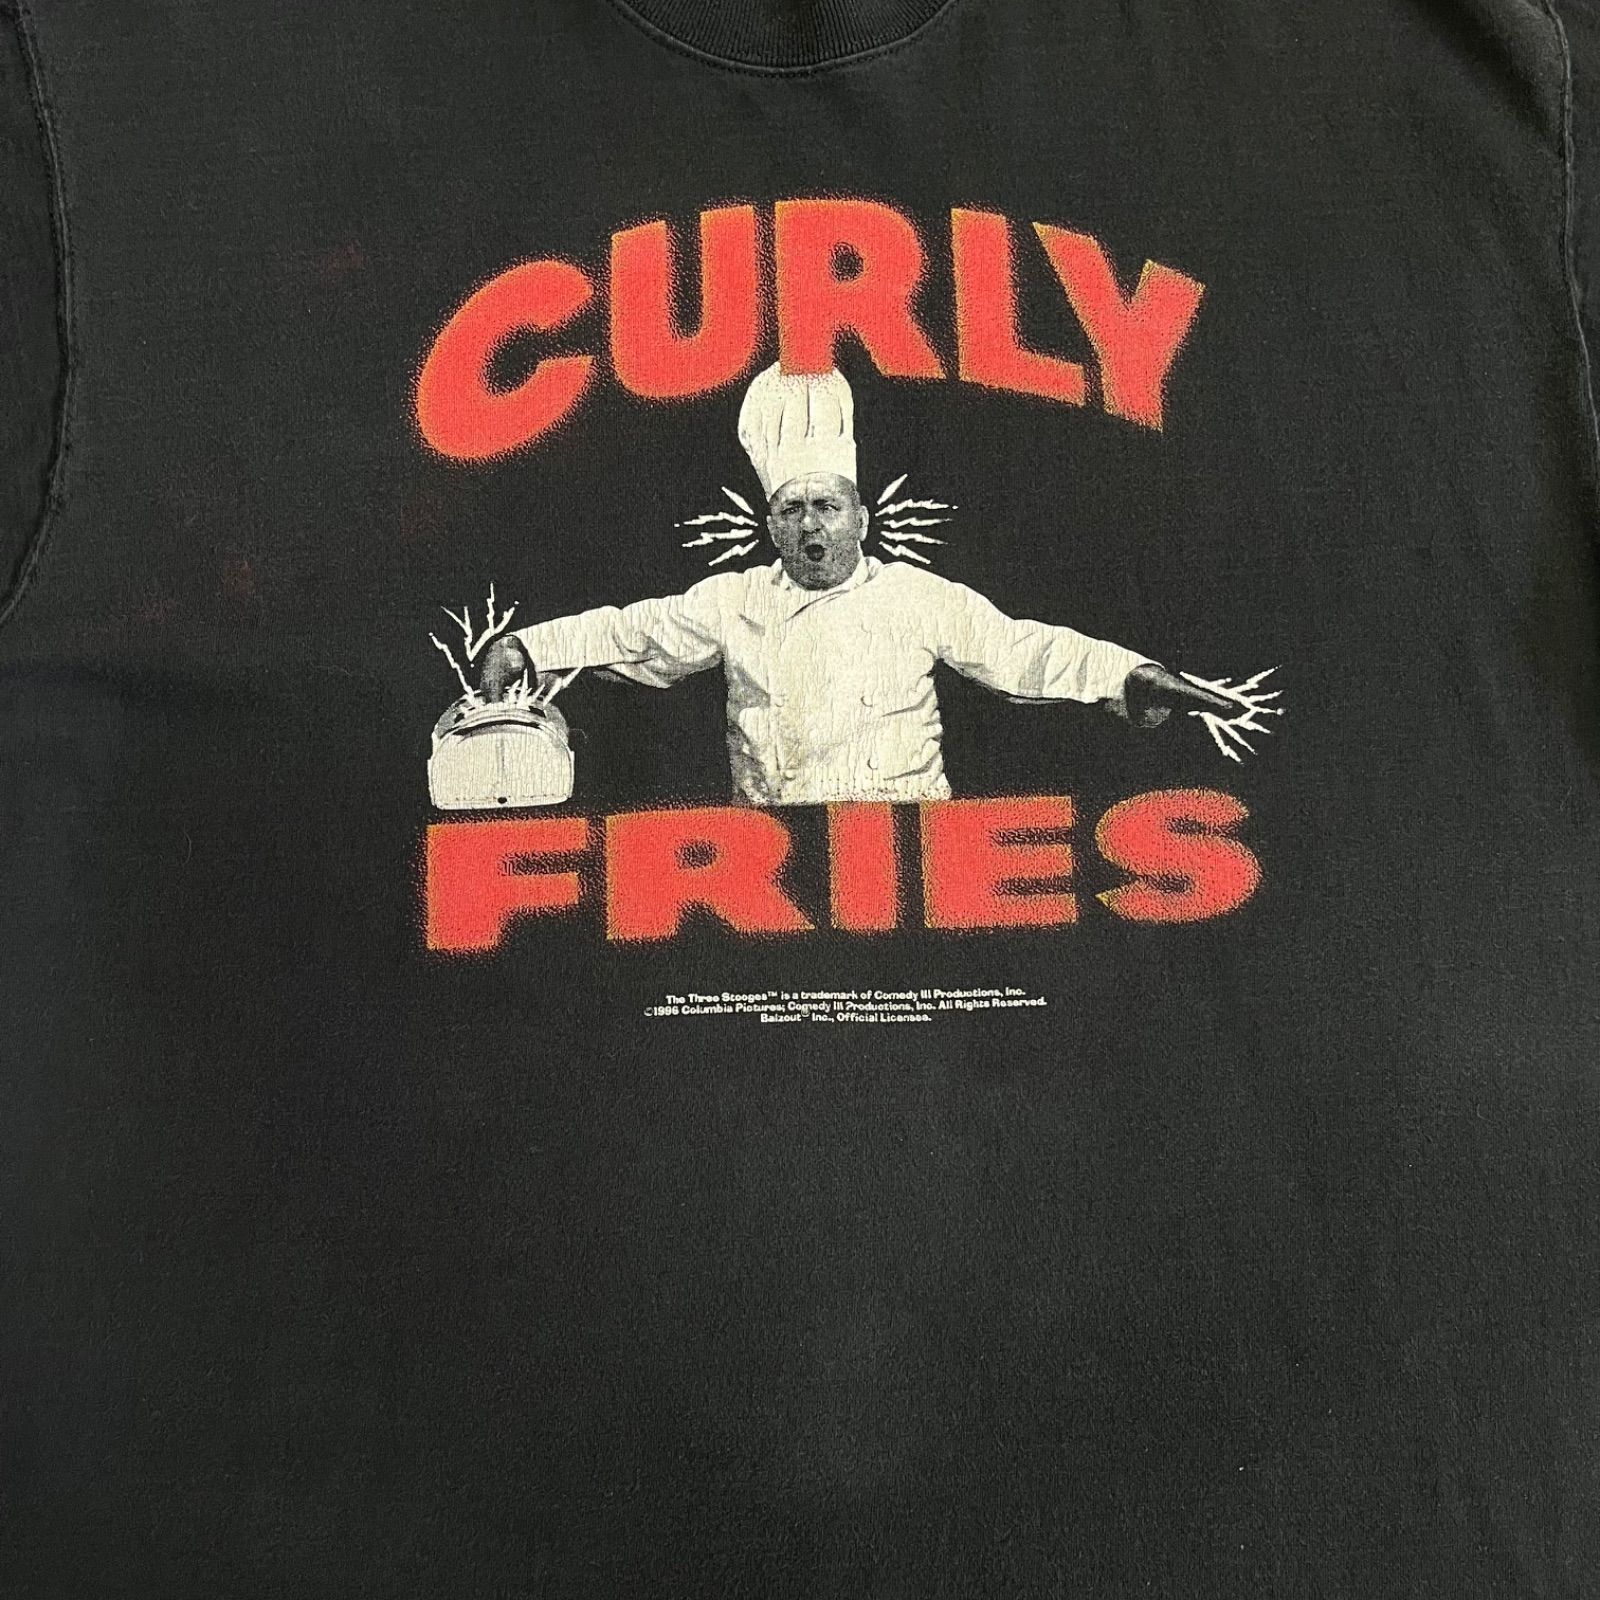 90s The Three stooges “Curly Fries” movie t-shirt 3バカトリオ 映画/ムービー Tシャツ 90年代  ヴィンテージ Usa製 アメリカ製